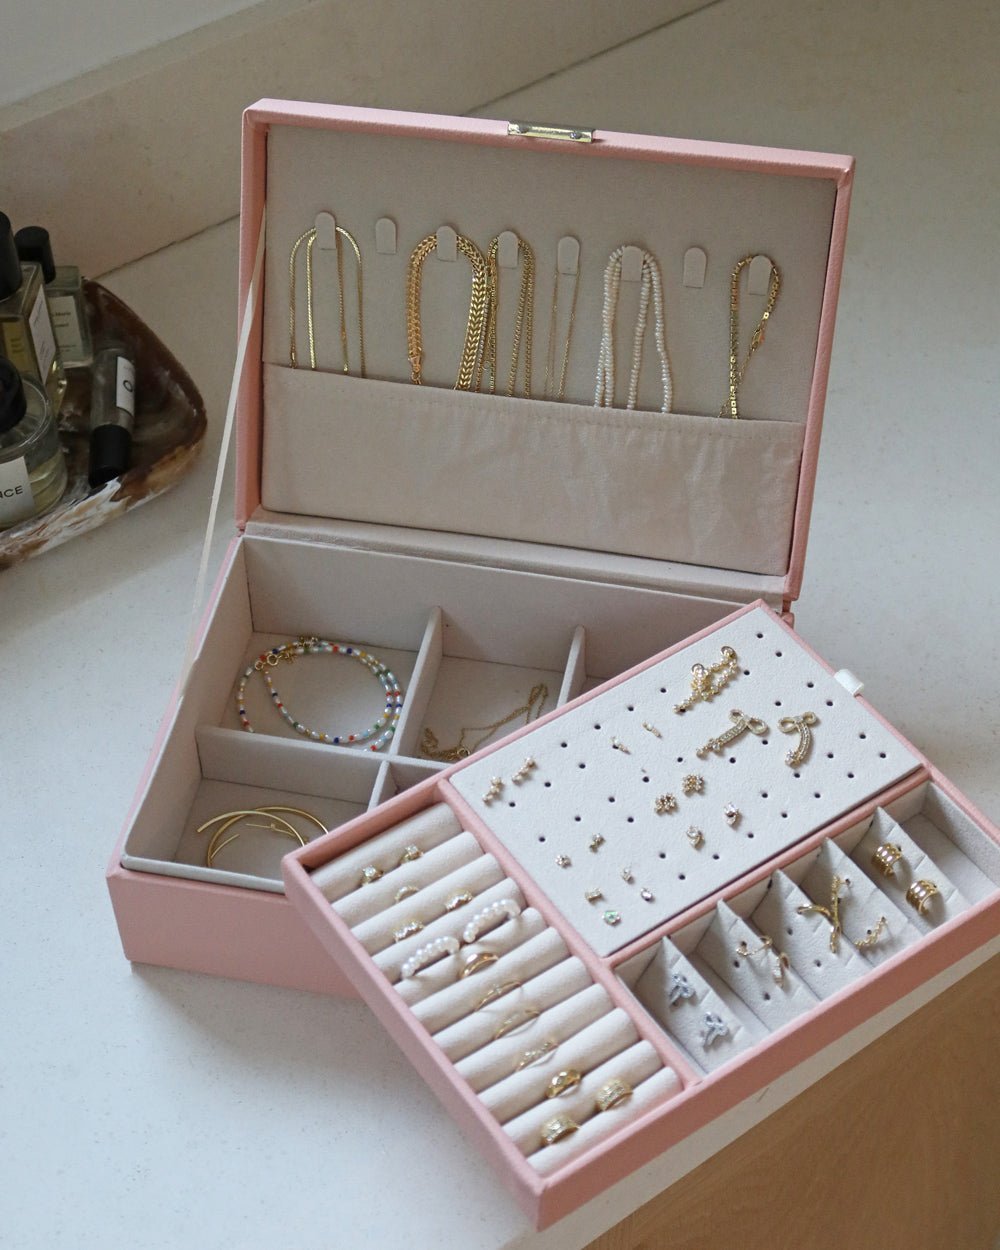 LARGE JEWELRY BOX ORGANIZER - Shop Cupcakes and Cashmere